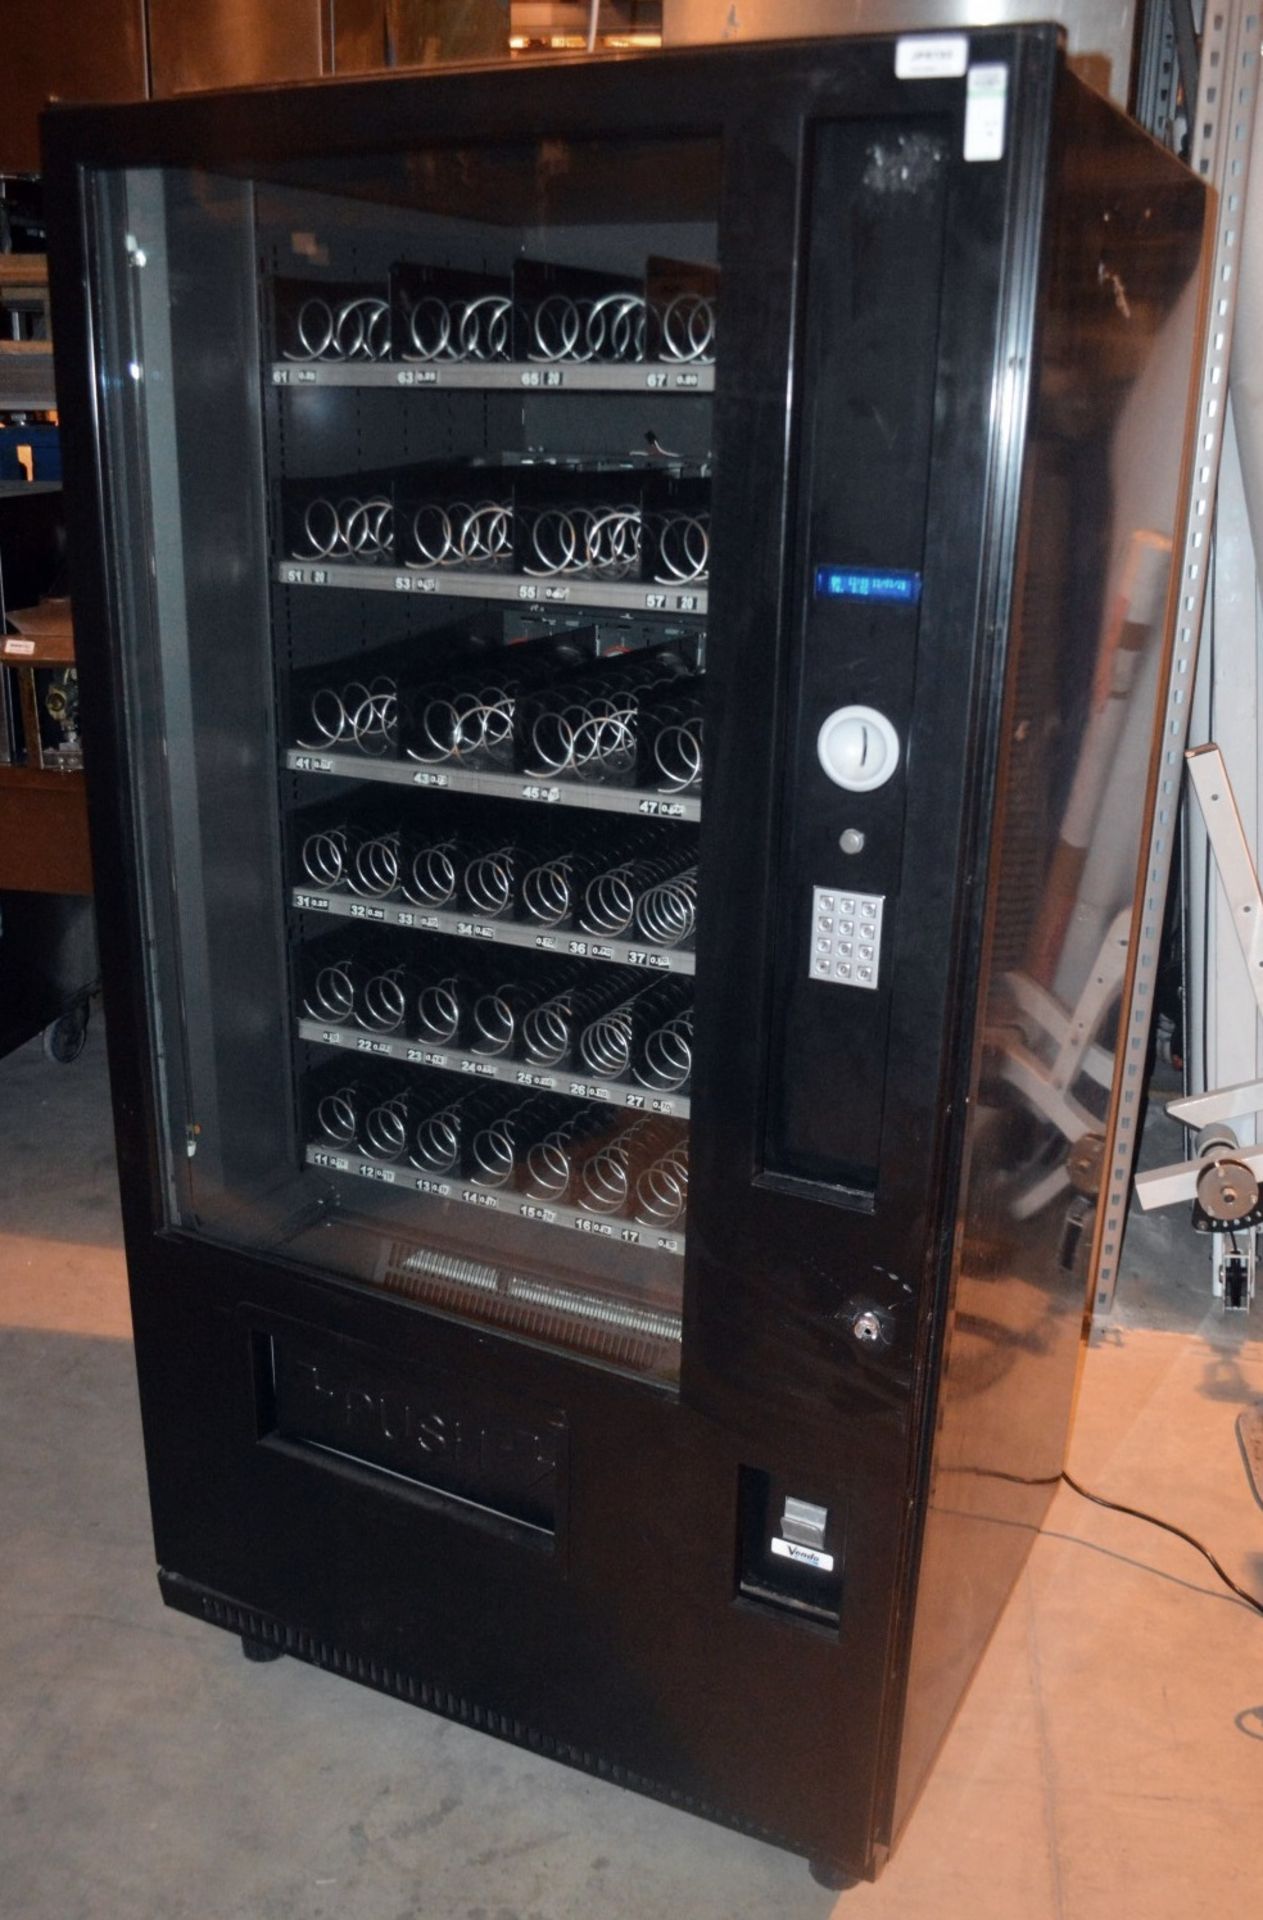 1 x VENDO Vending Machine (SVE G5F) - Dimensions: H184 x W96 x D86cm - Very Recently Removed From